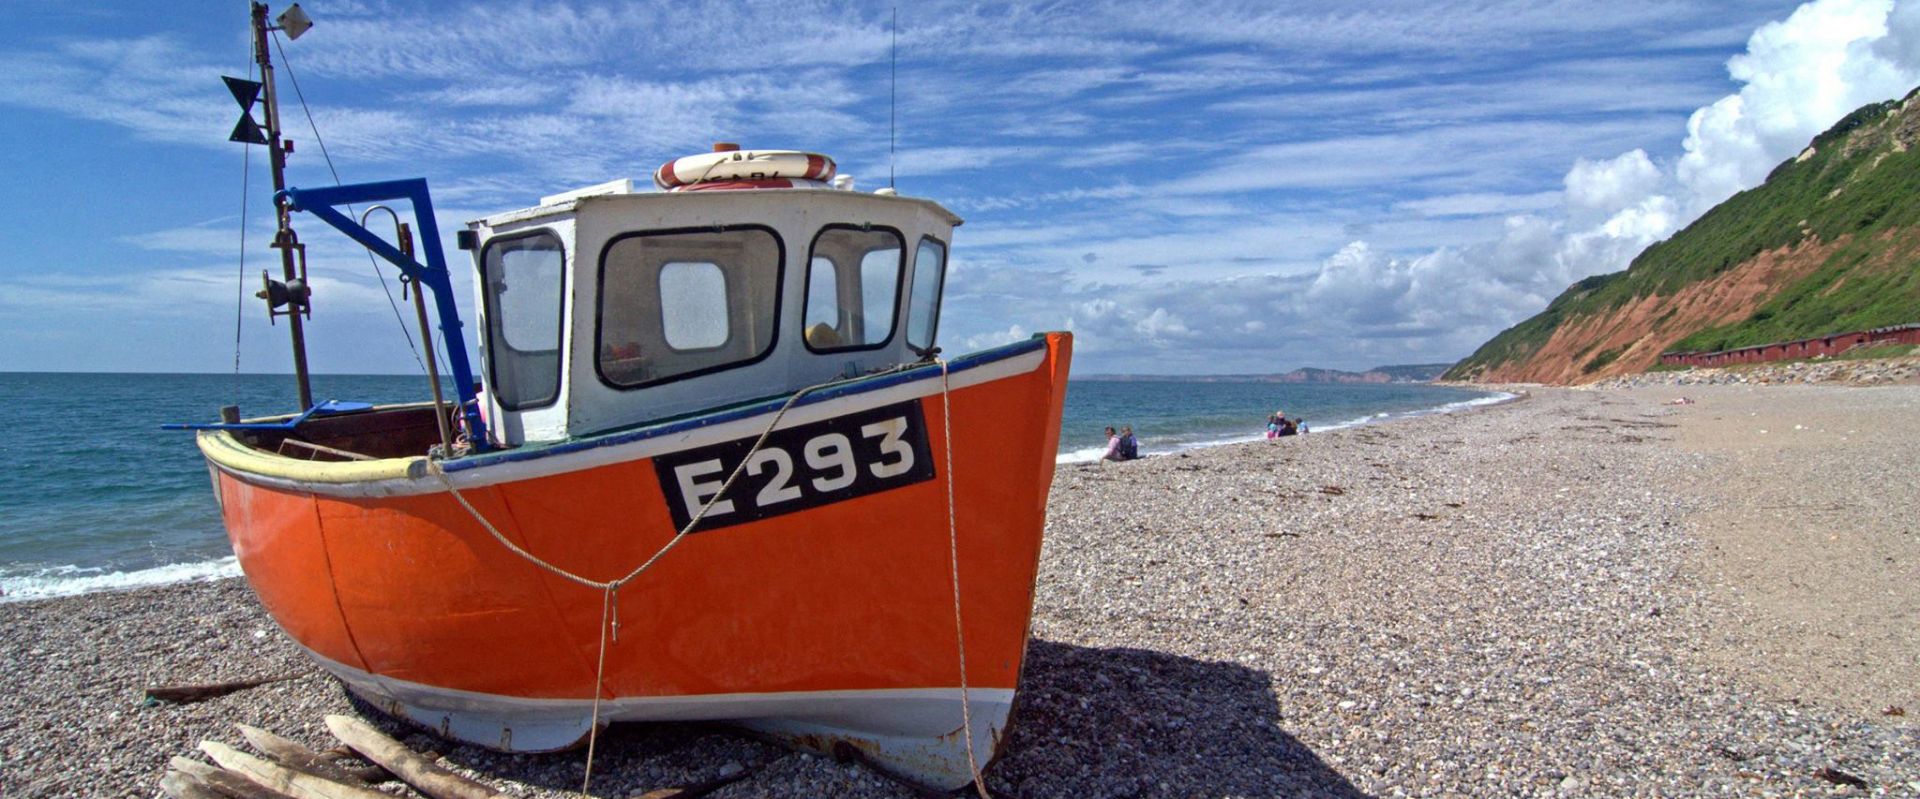 Fishing boat at Branscombe